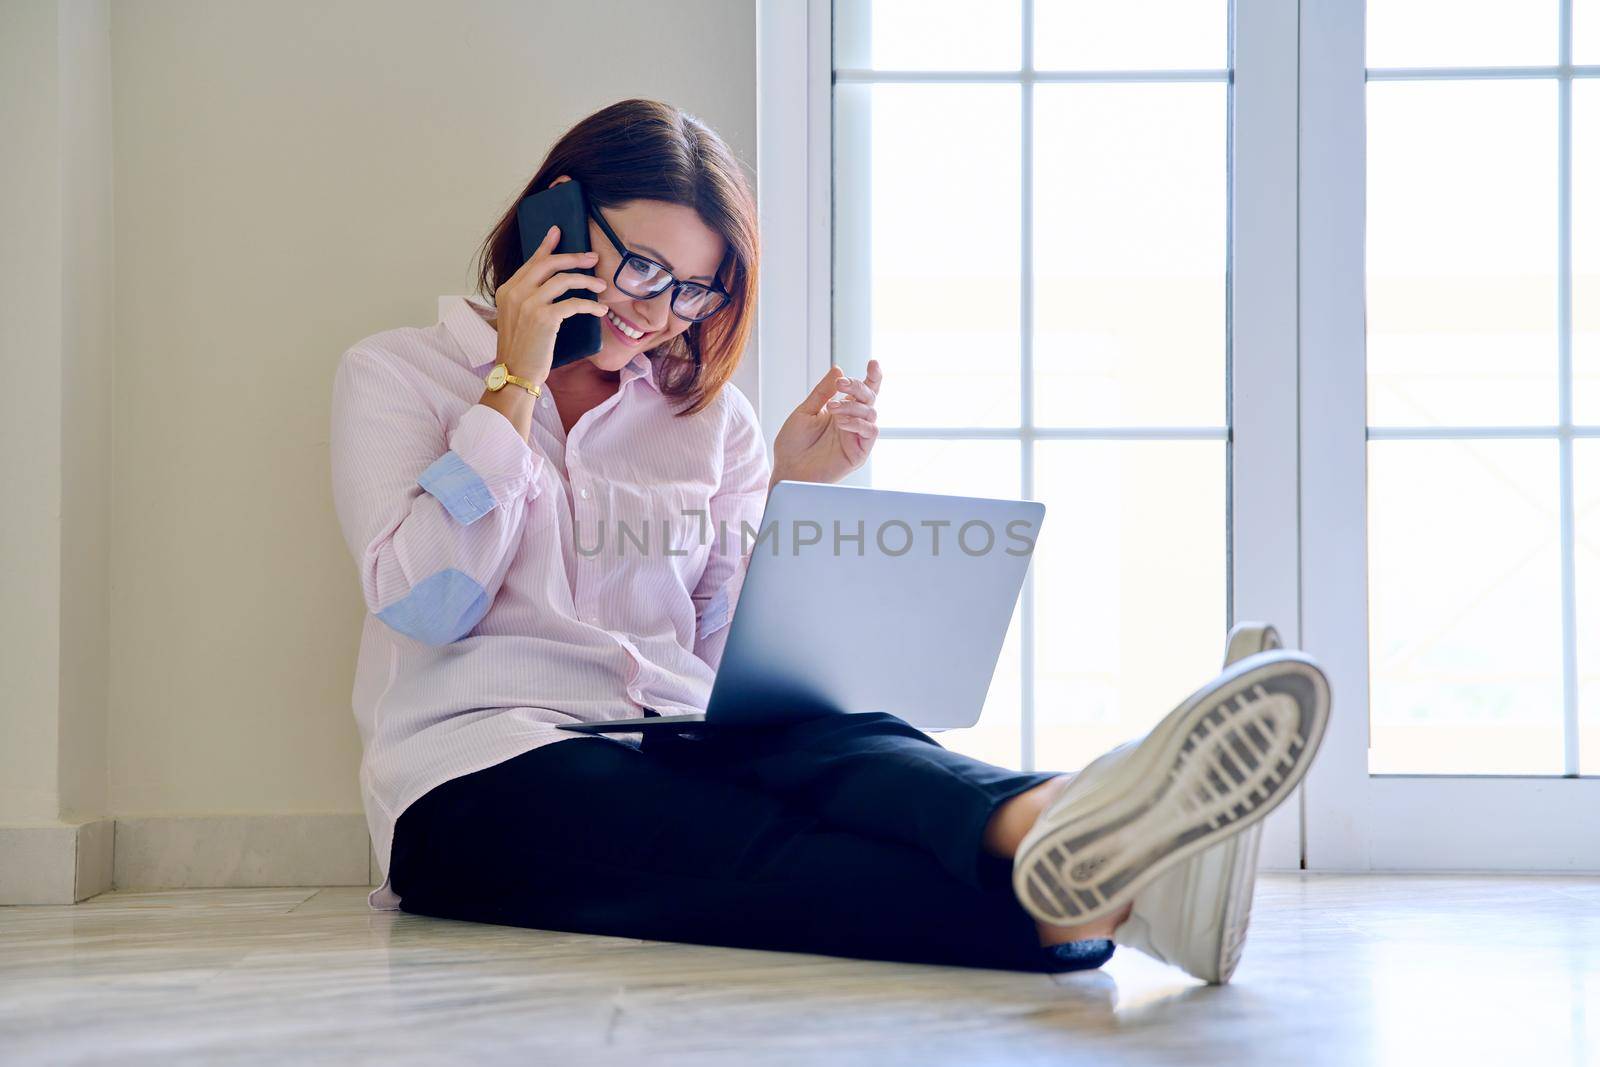 Business woman sitting on floor with laptop talking on smartphone, home office. Female psychologist counselor teacher mentor therapist analyst working online. Technology in business education medicine